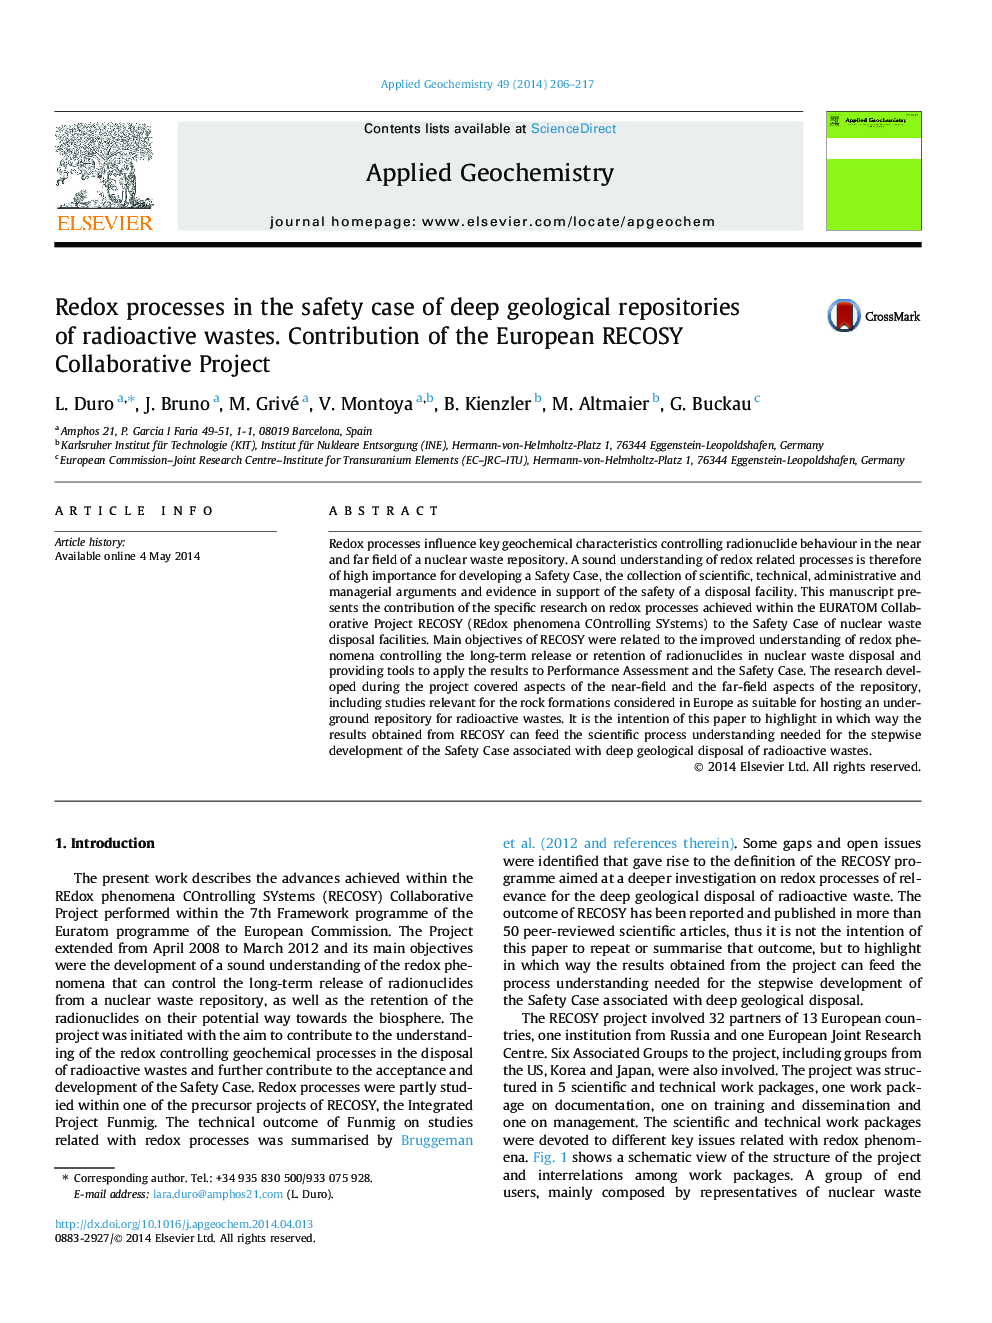 Redox processes in the safety case of deep geological repositories of radioactive wastes. Contribution of the European RECOSY Collaborative Project